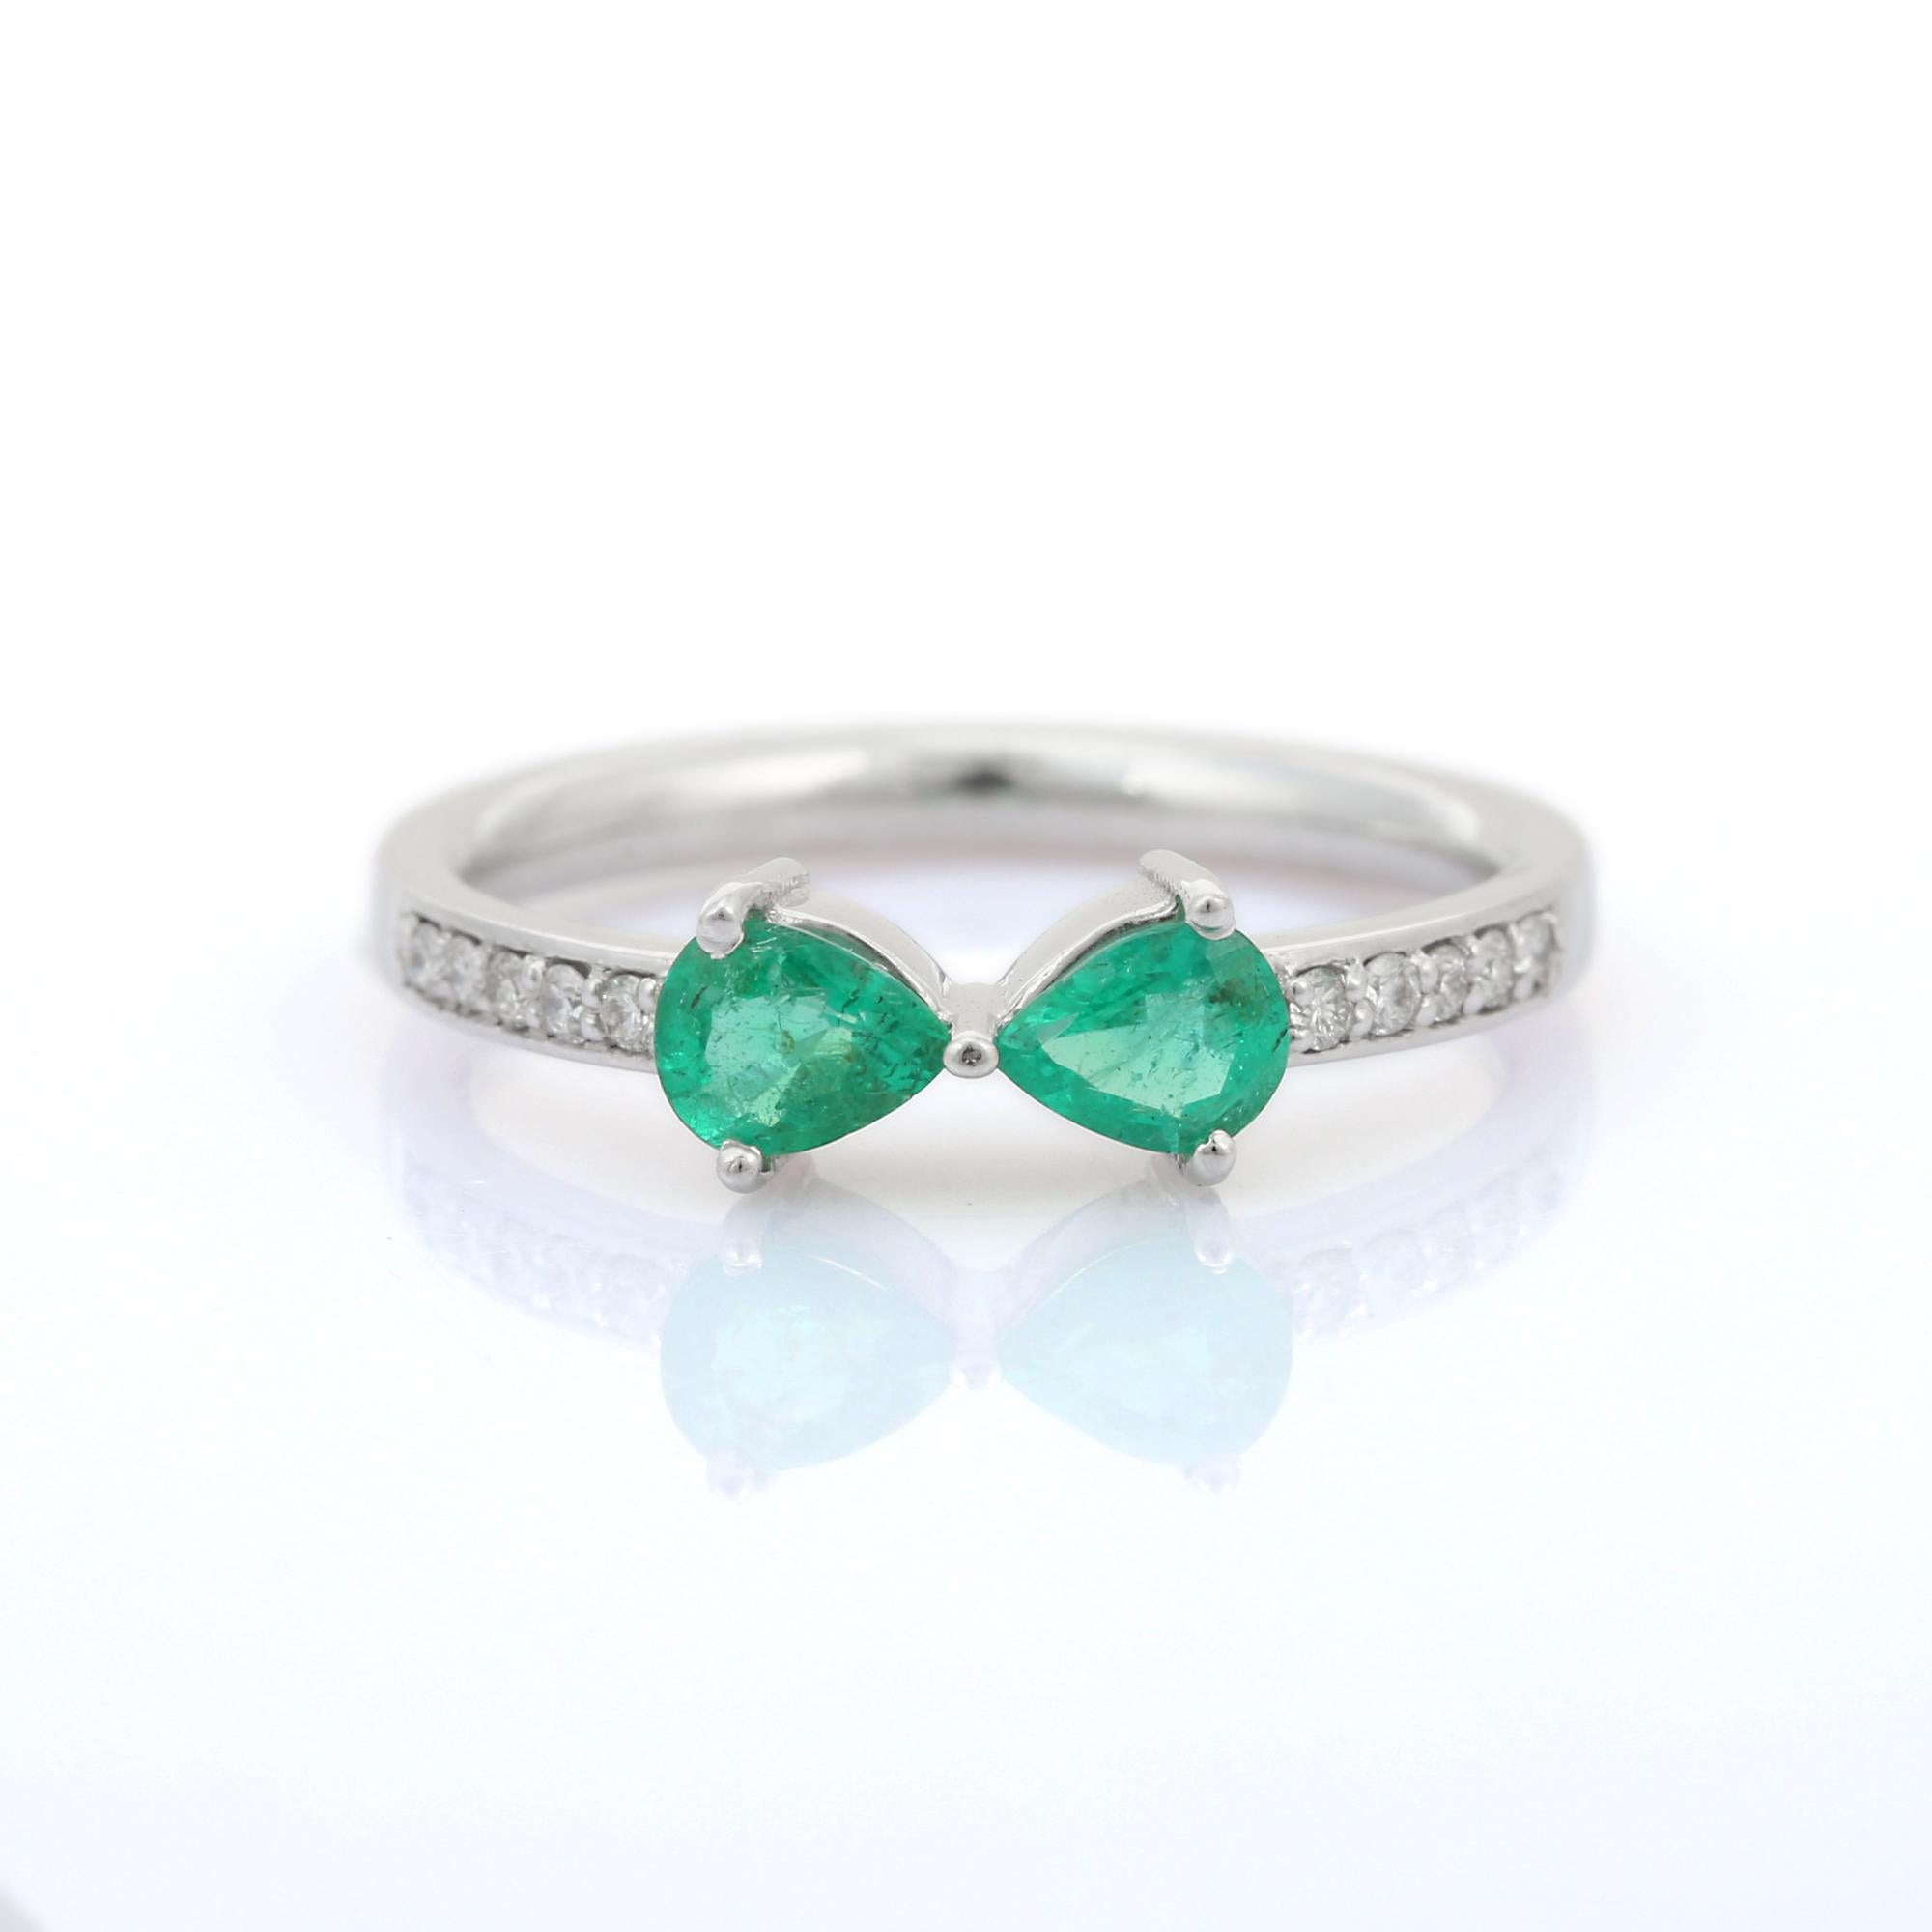 For Sale:  Natural Pear Cut Emerald Ring with Diamonds in 18K Solid White Gold 2